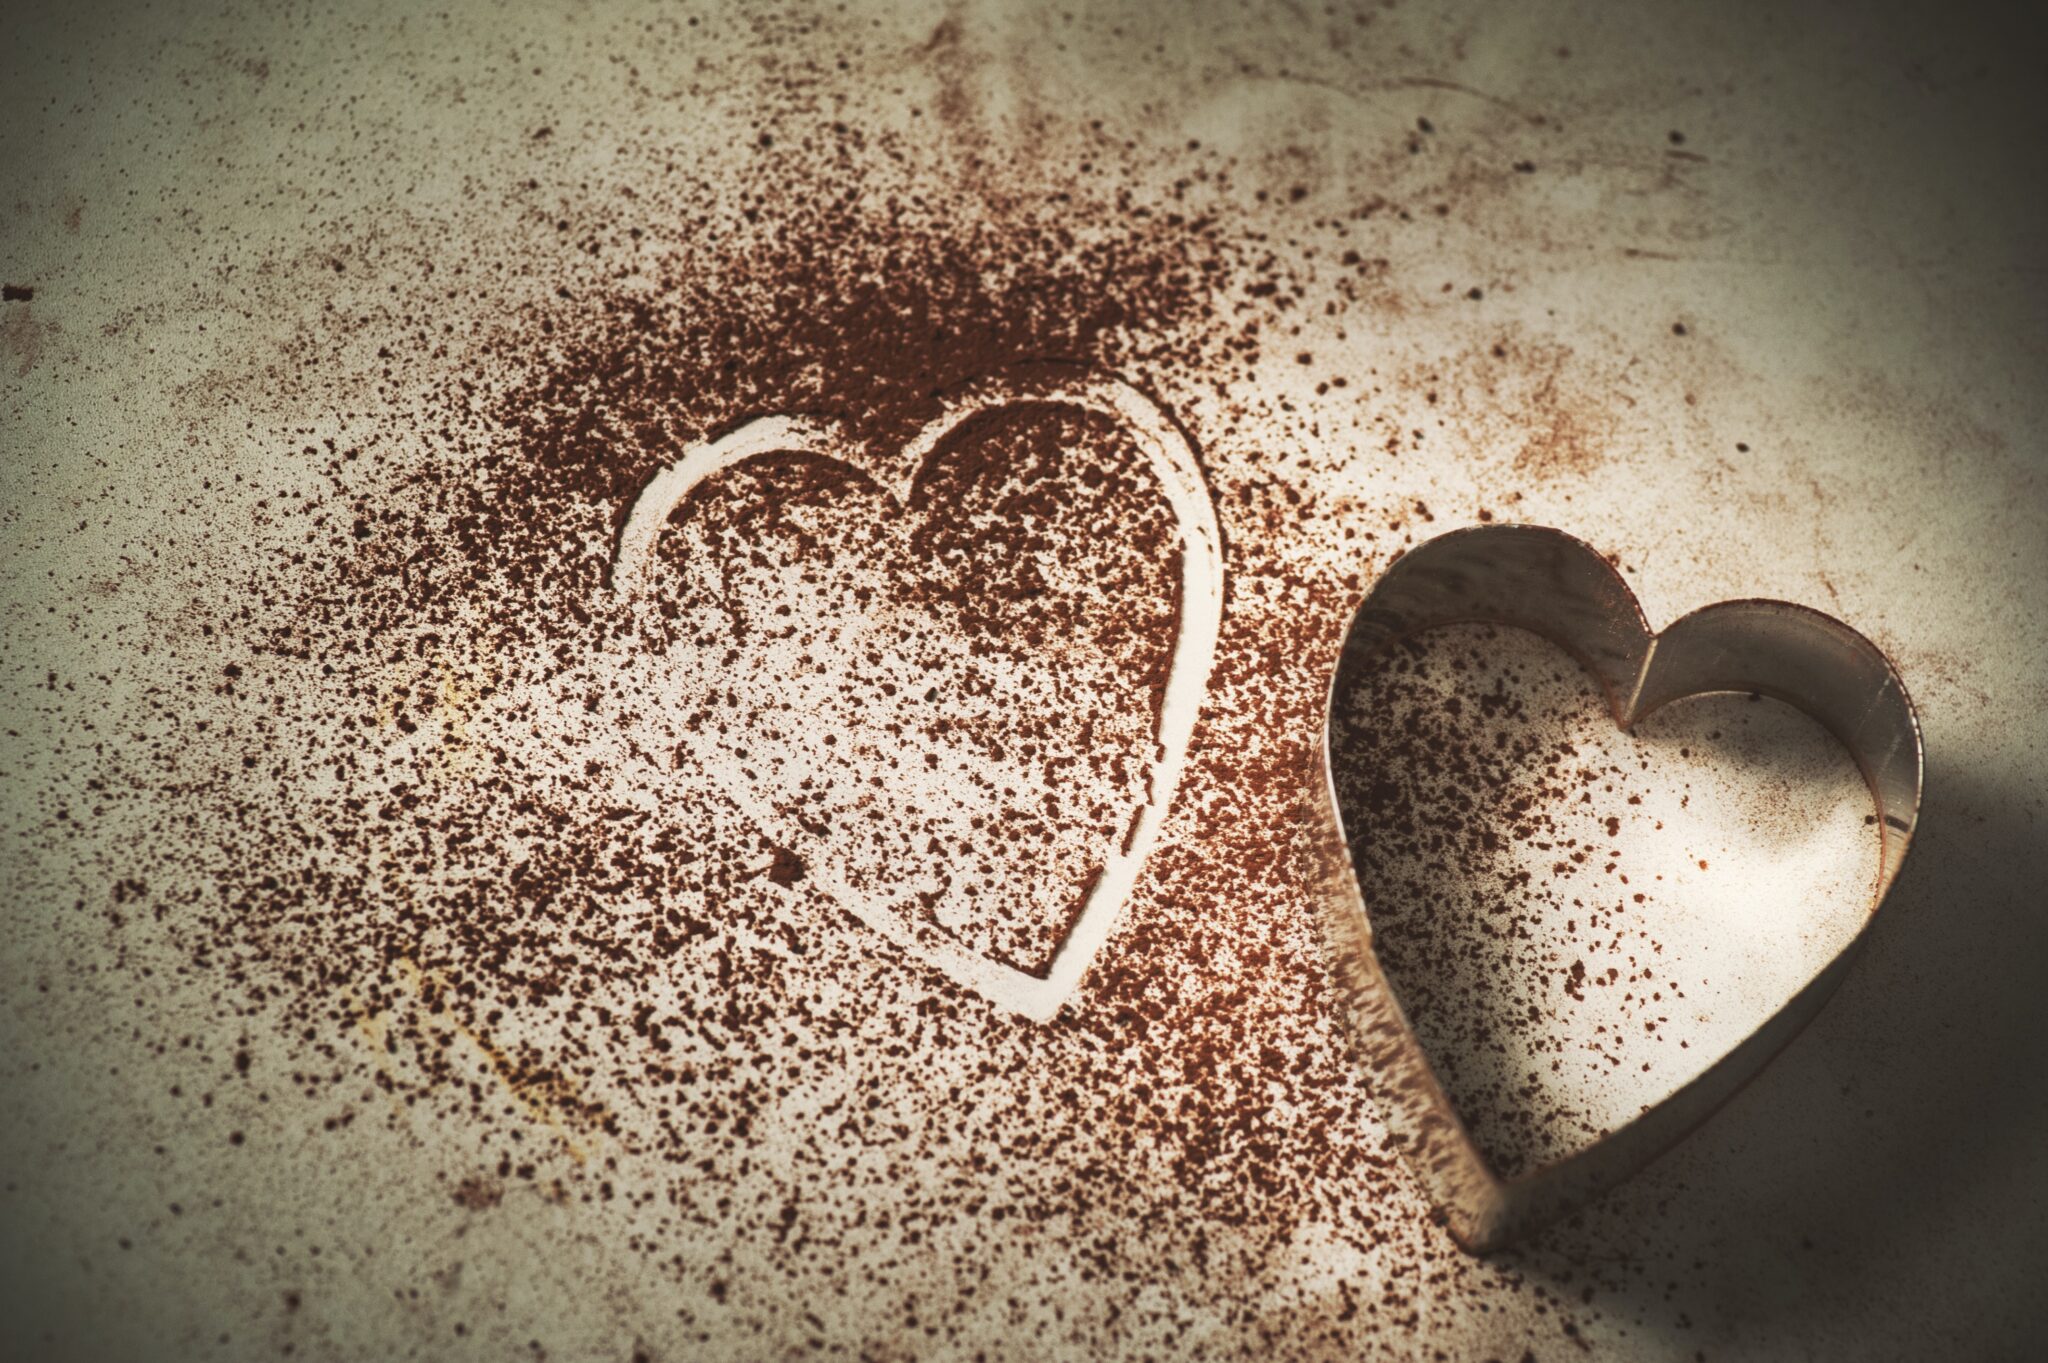 Chocolate powder with a heart stamped into it